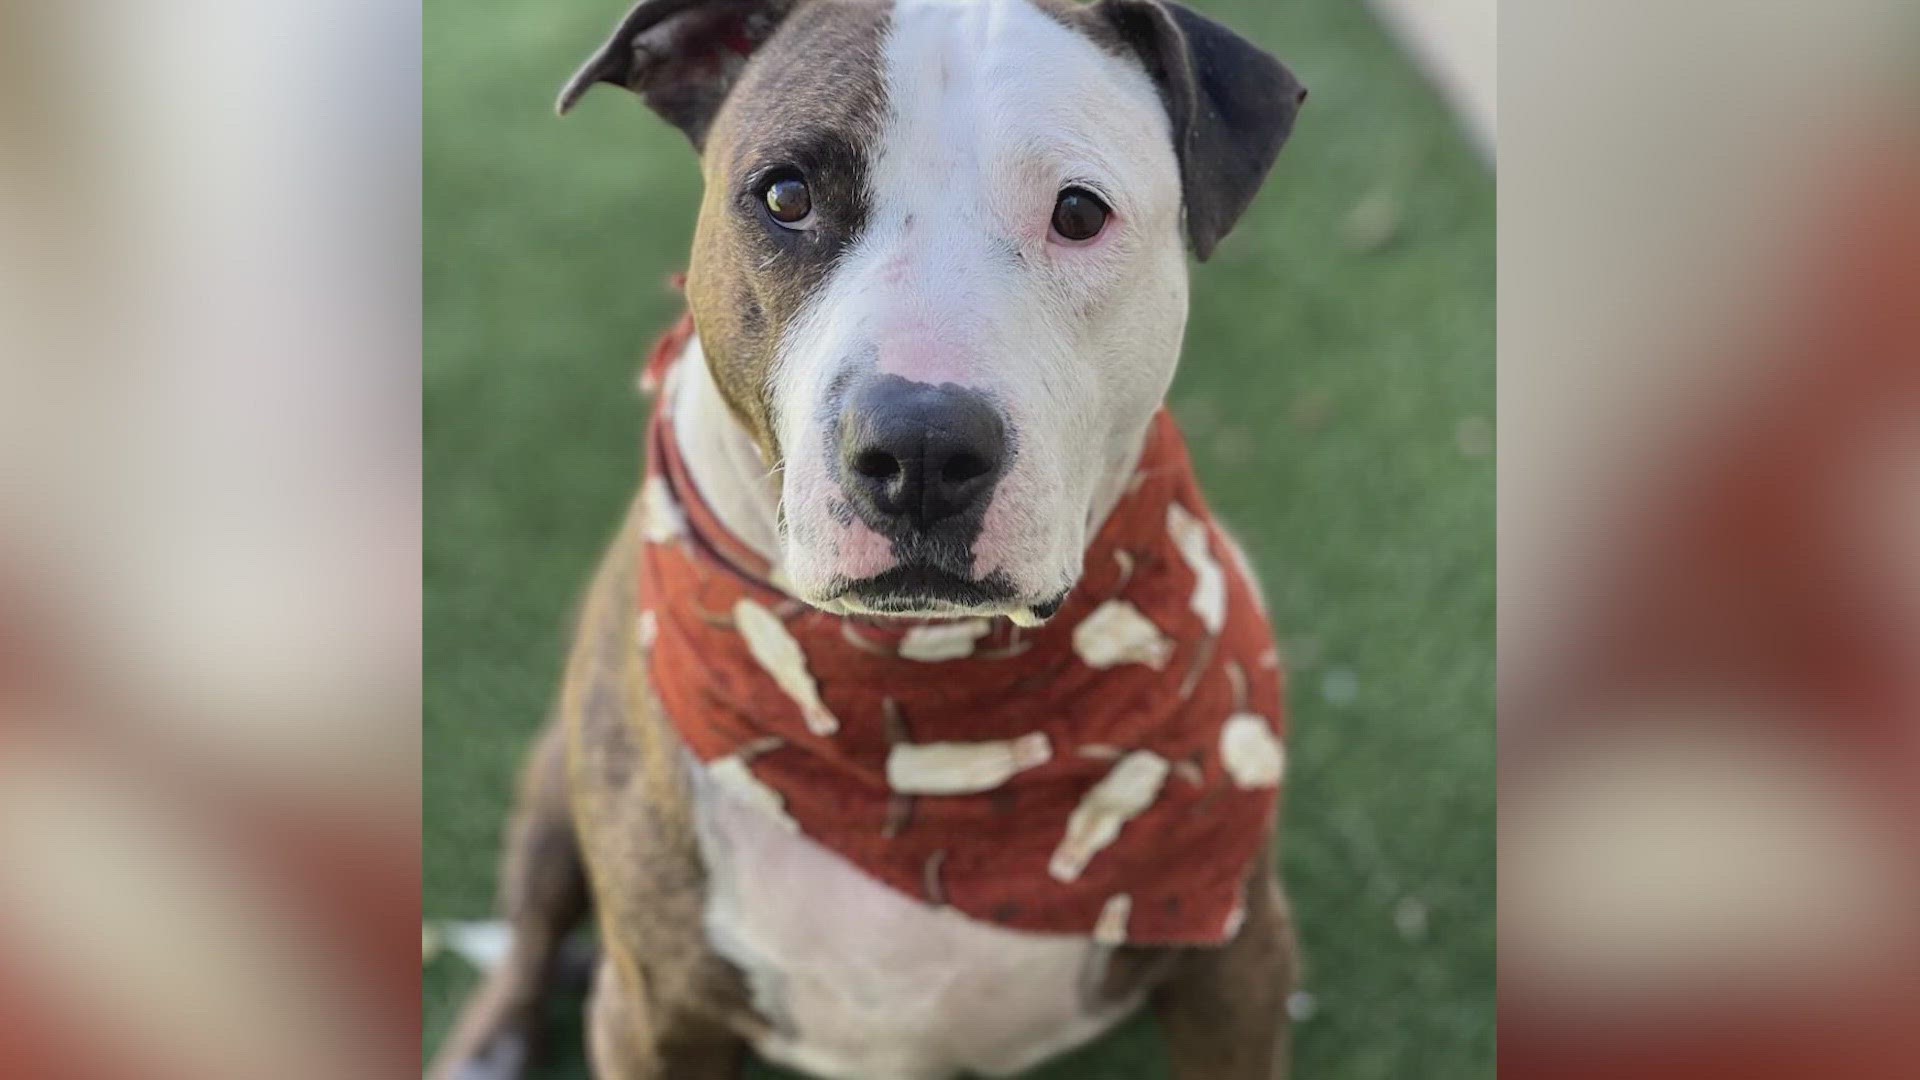 Being pulled from the euthanasia list doesn't guarantee a loving home right away. Zeke has spent more than 425 days waiting at the shelter for someone to notice him.